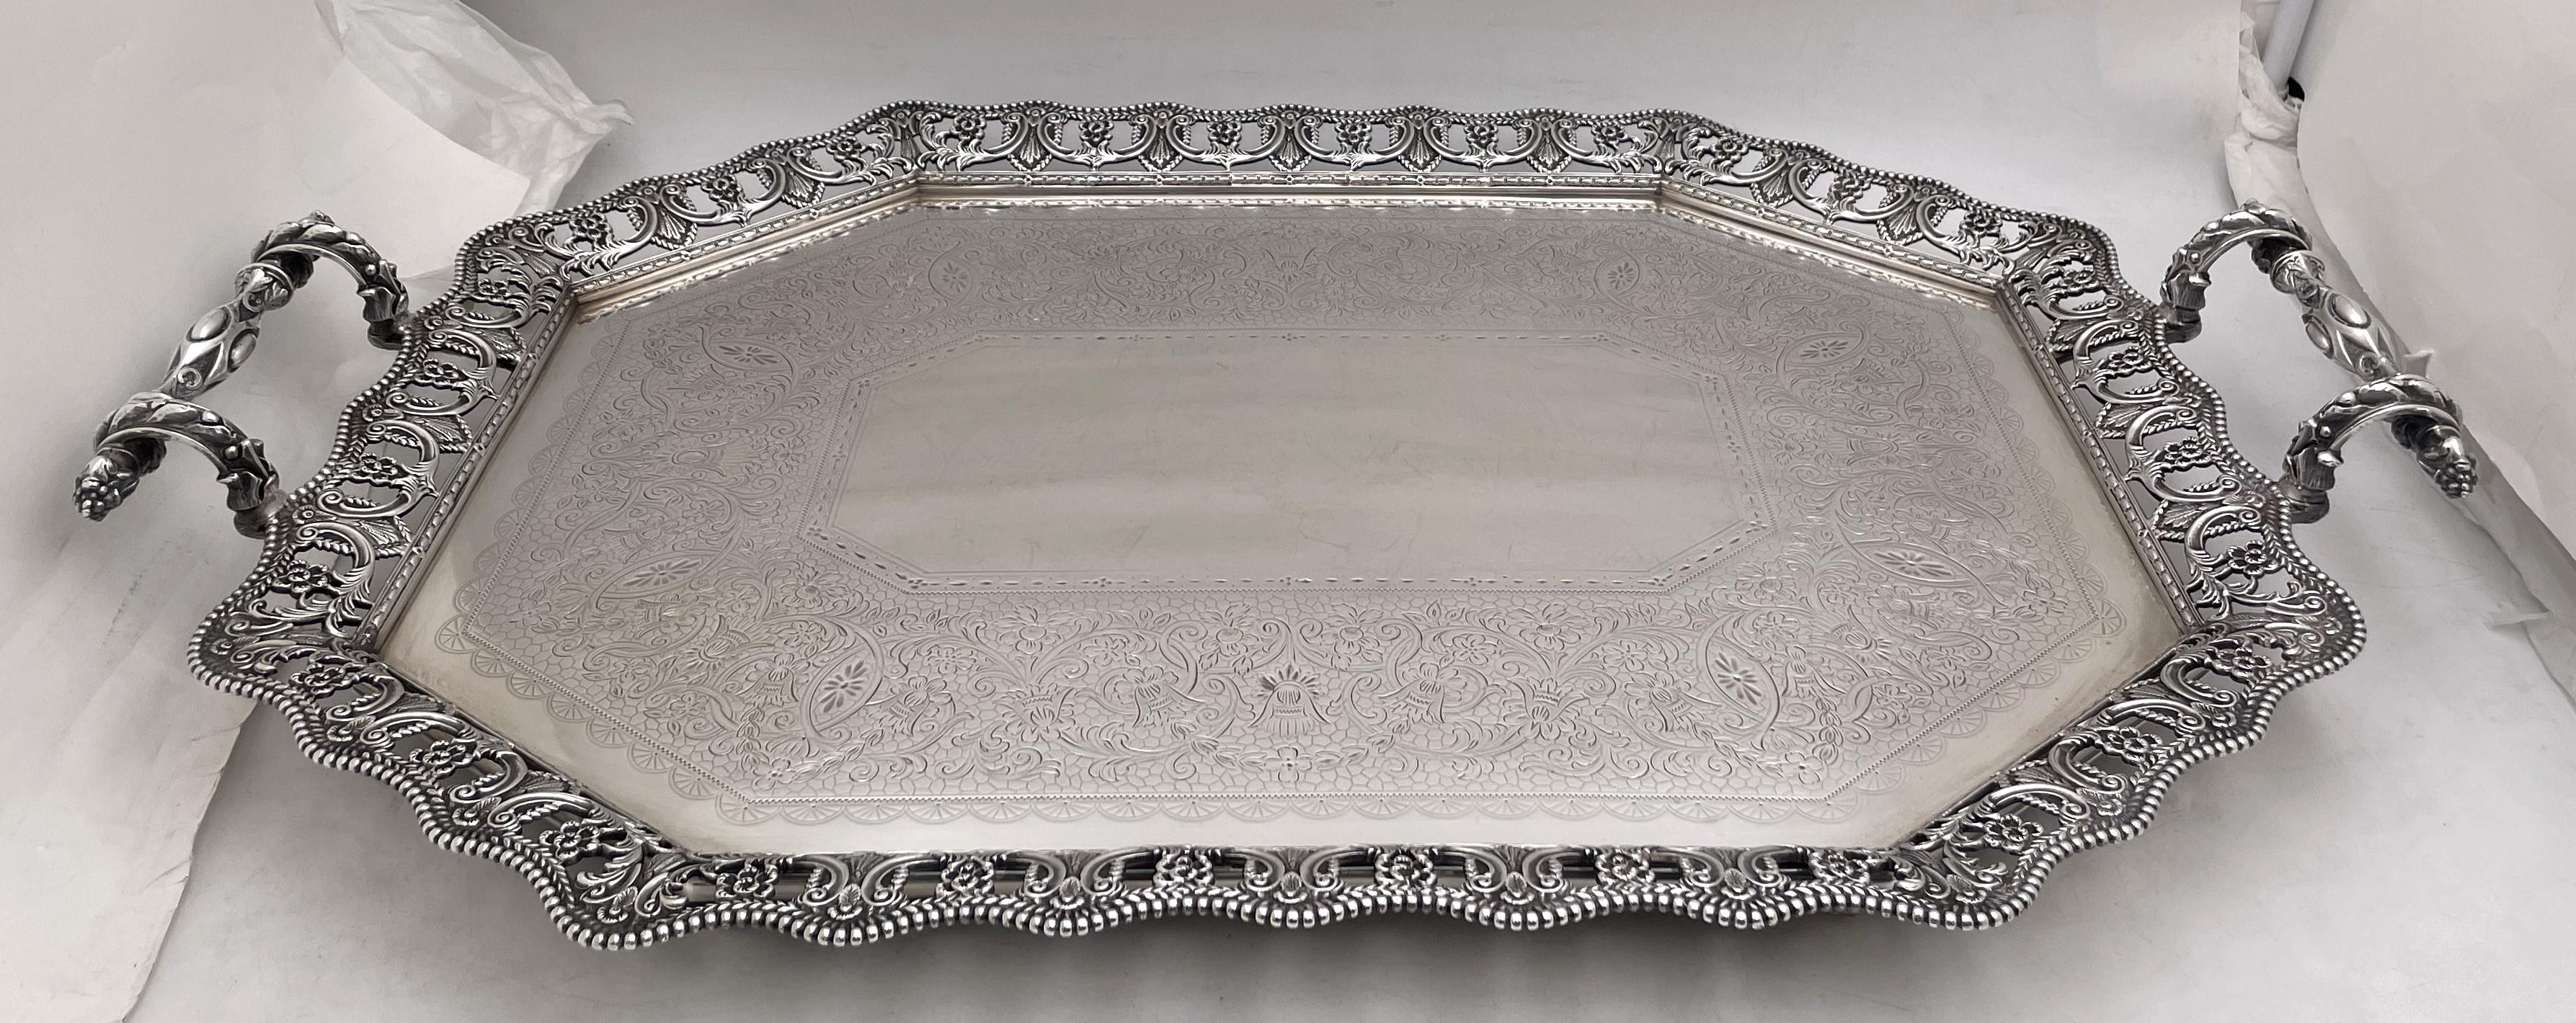 Martin, Hall & Co. sterling silver gallery tray from 1888 (Victorian era), made in Sheffield, England, beautifully adorned with engraved floral and geometric motifs, with two finely applied bamboo style handles, and standing on 4 raised balled feet.